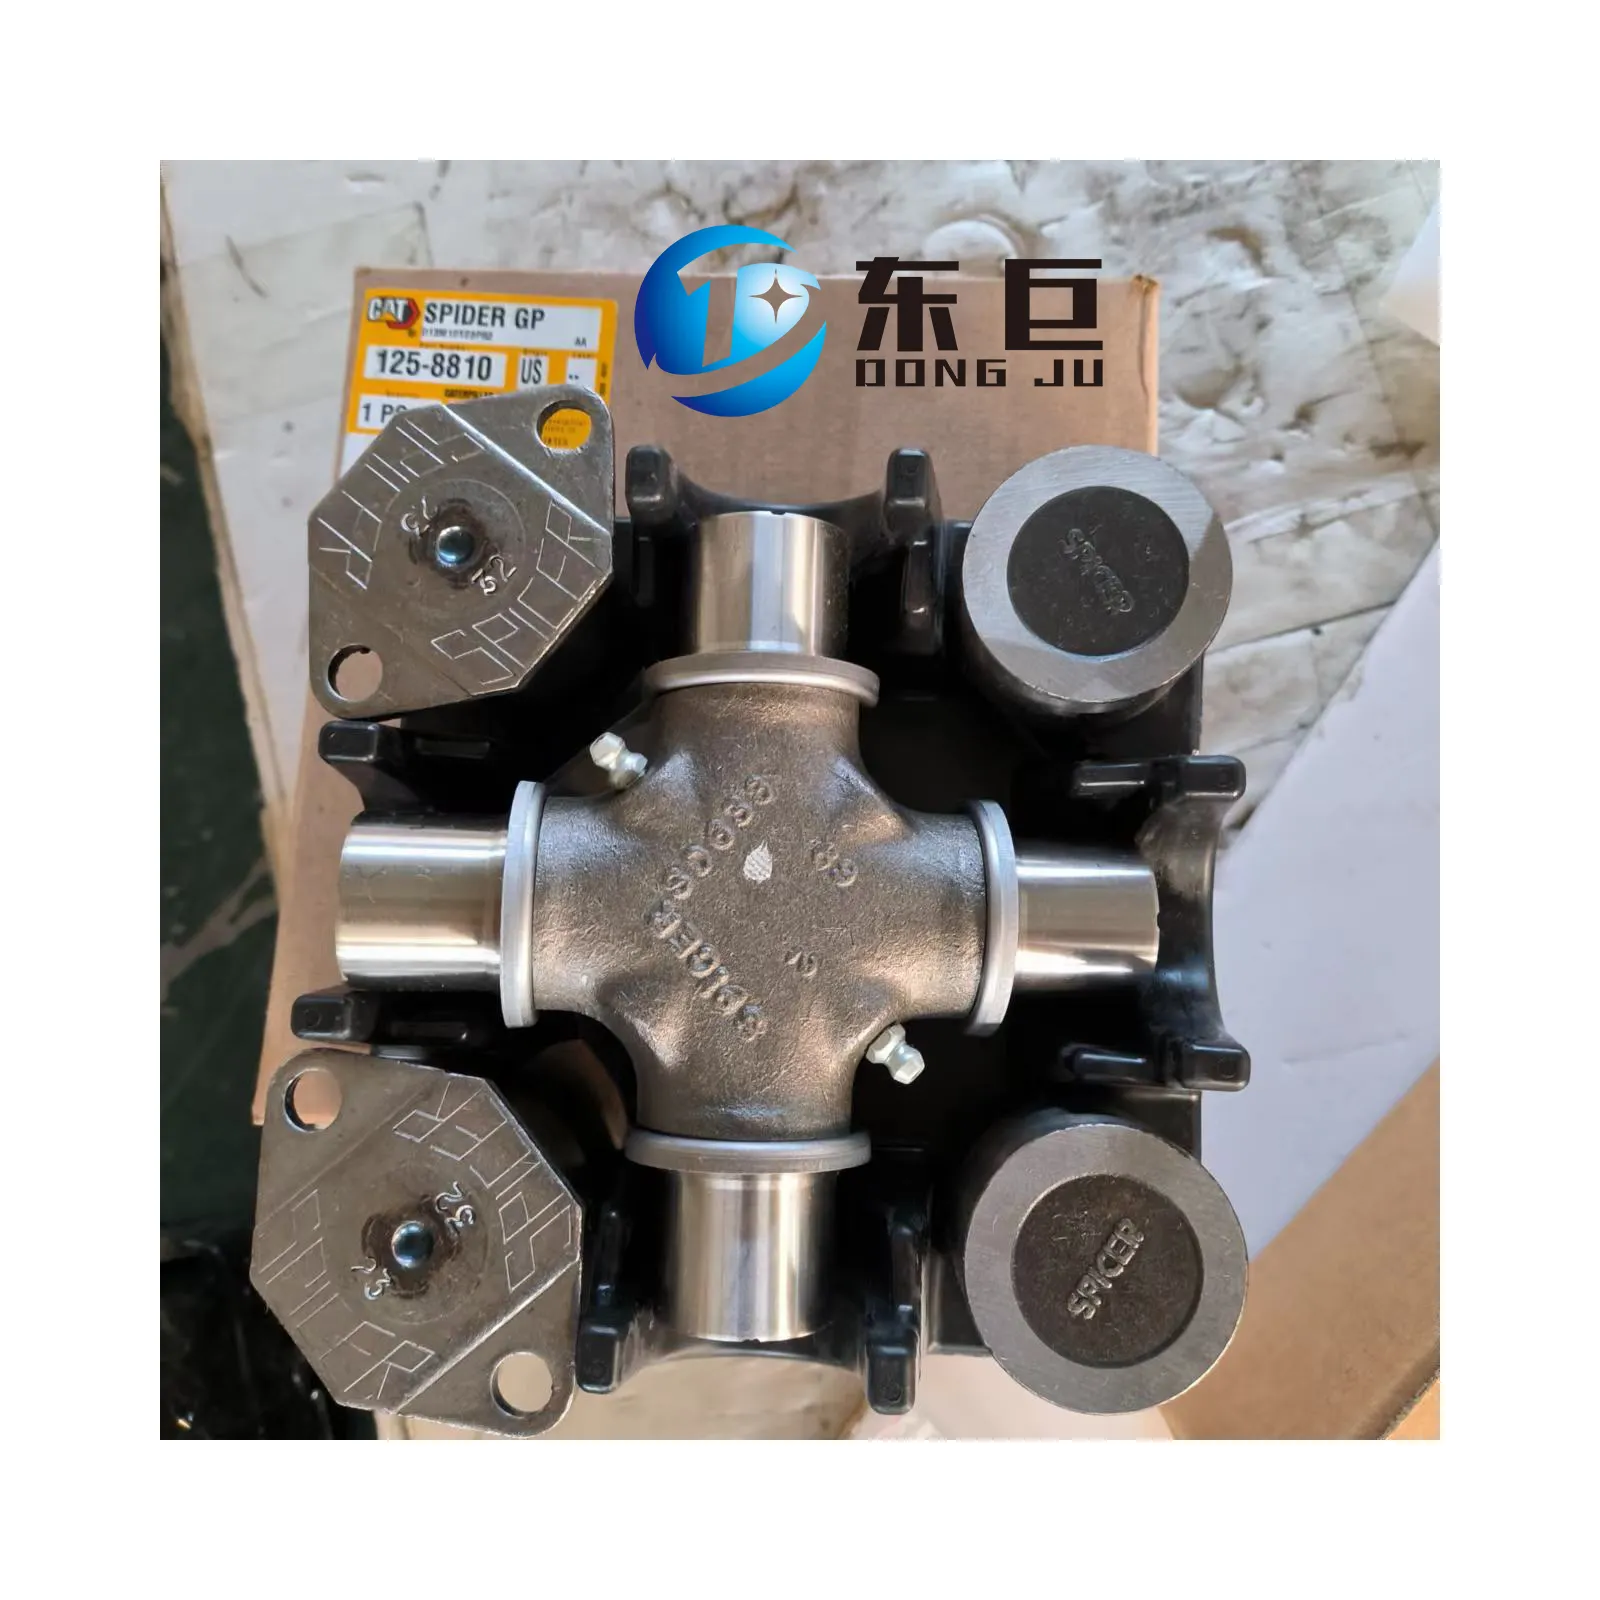 Original SLIP JOINT GP UNIVERSAL JOINT ASSEMBLY 1555607 155-5607 with stock available and fast delivery for CAT